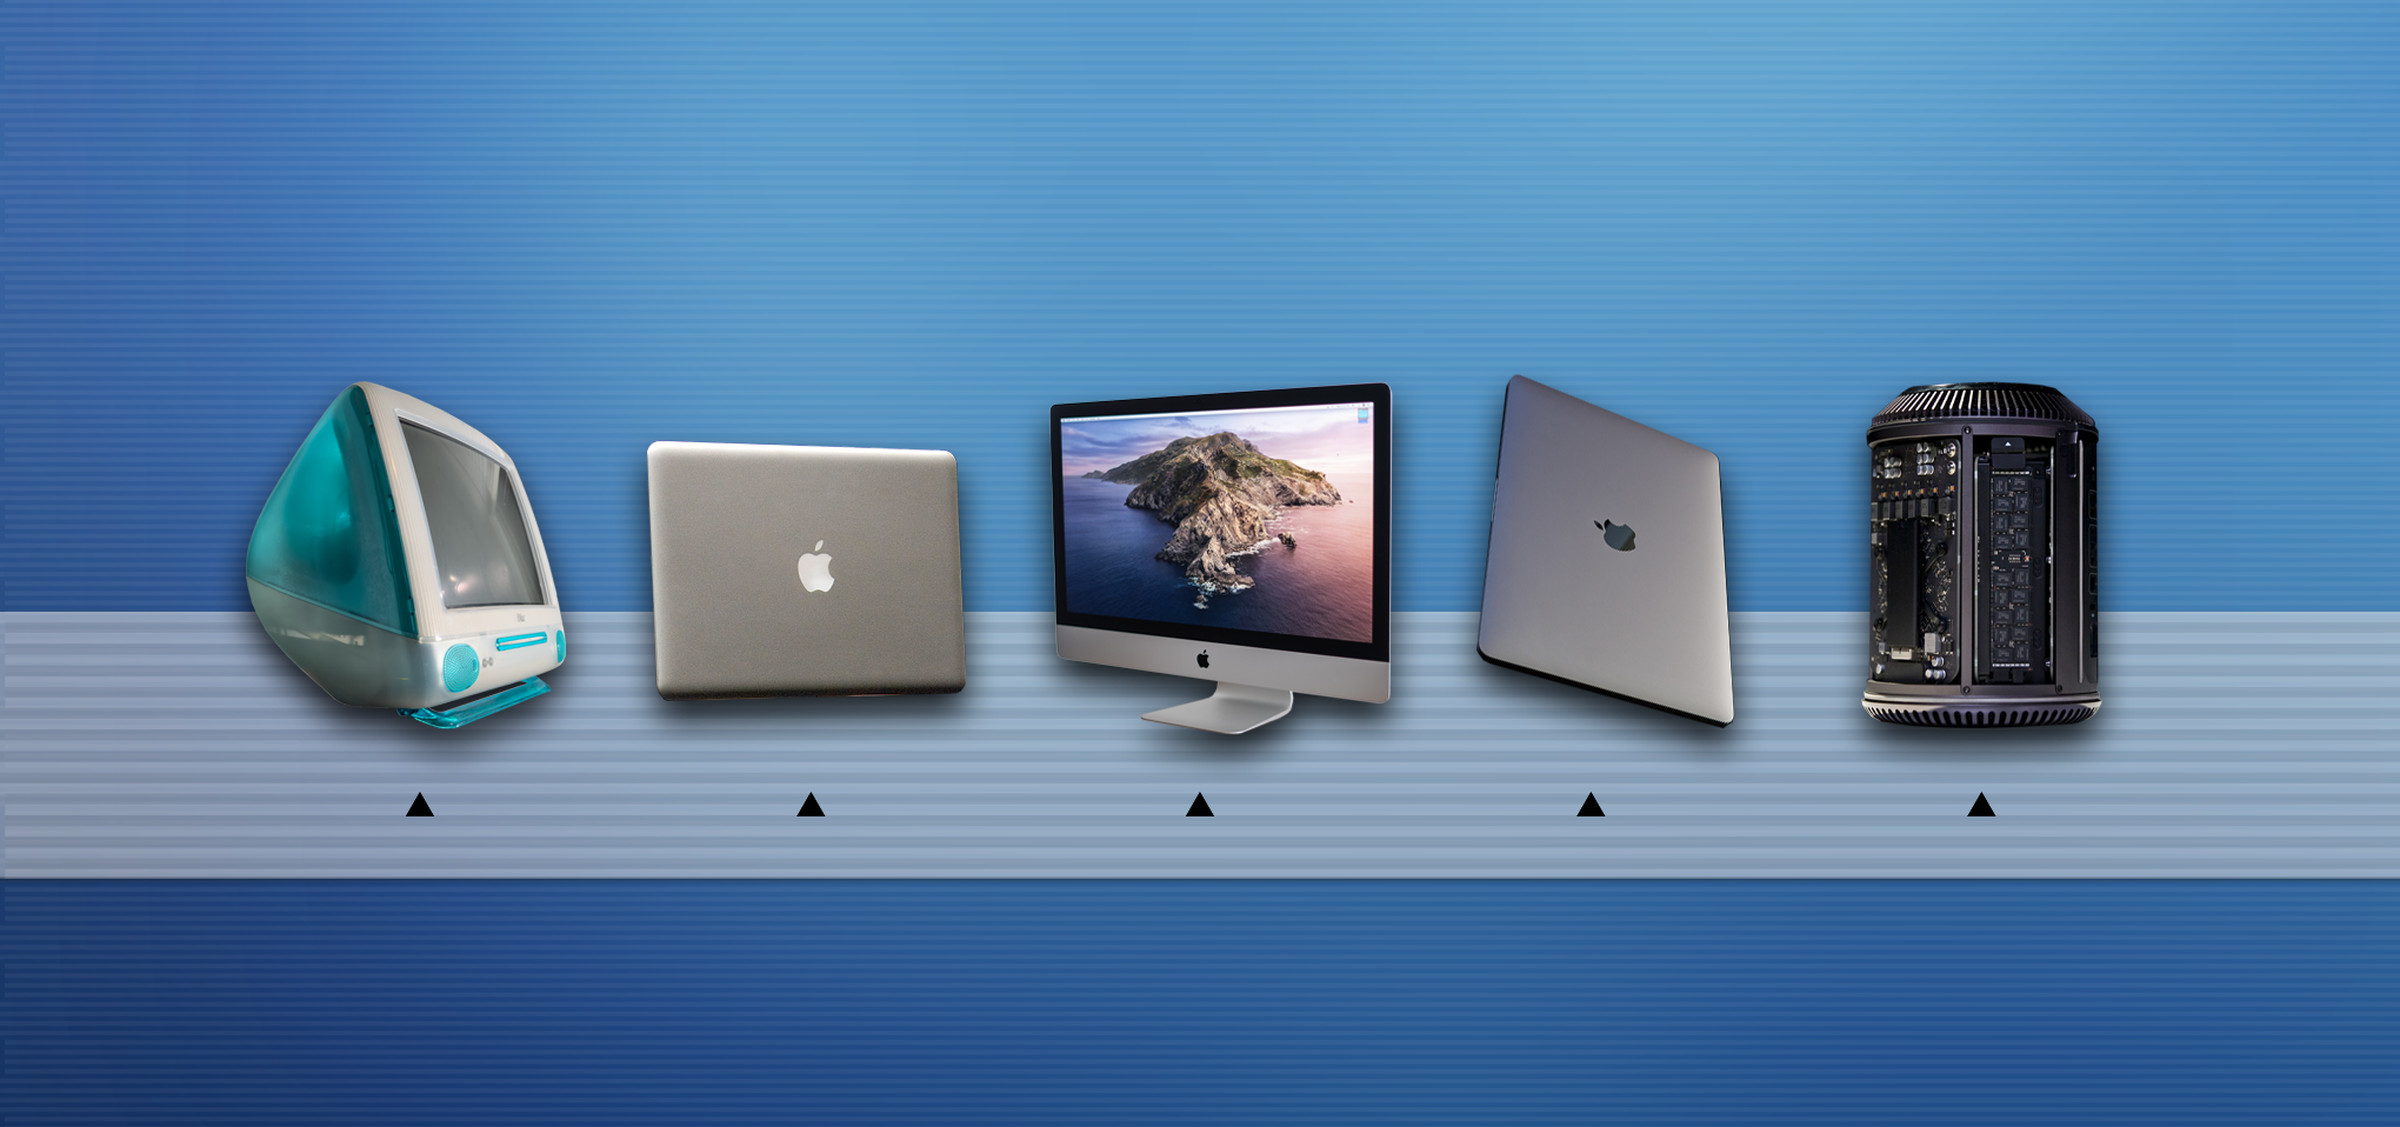 Five Macs sit on a graphic that looks like the Dock from macOS. 